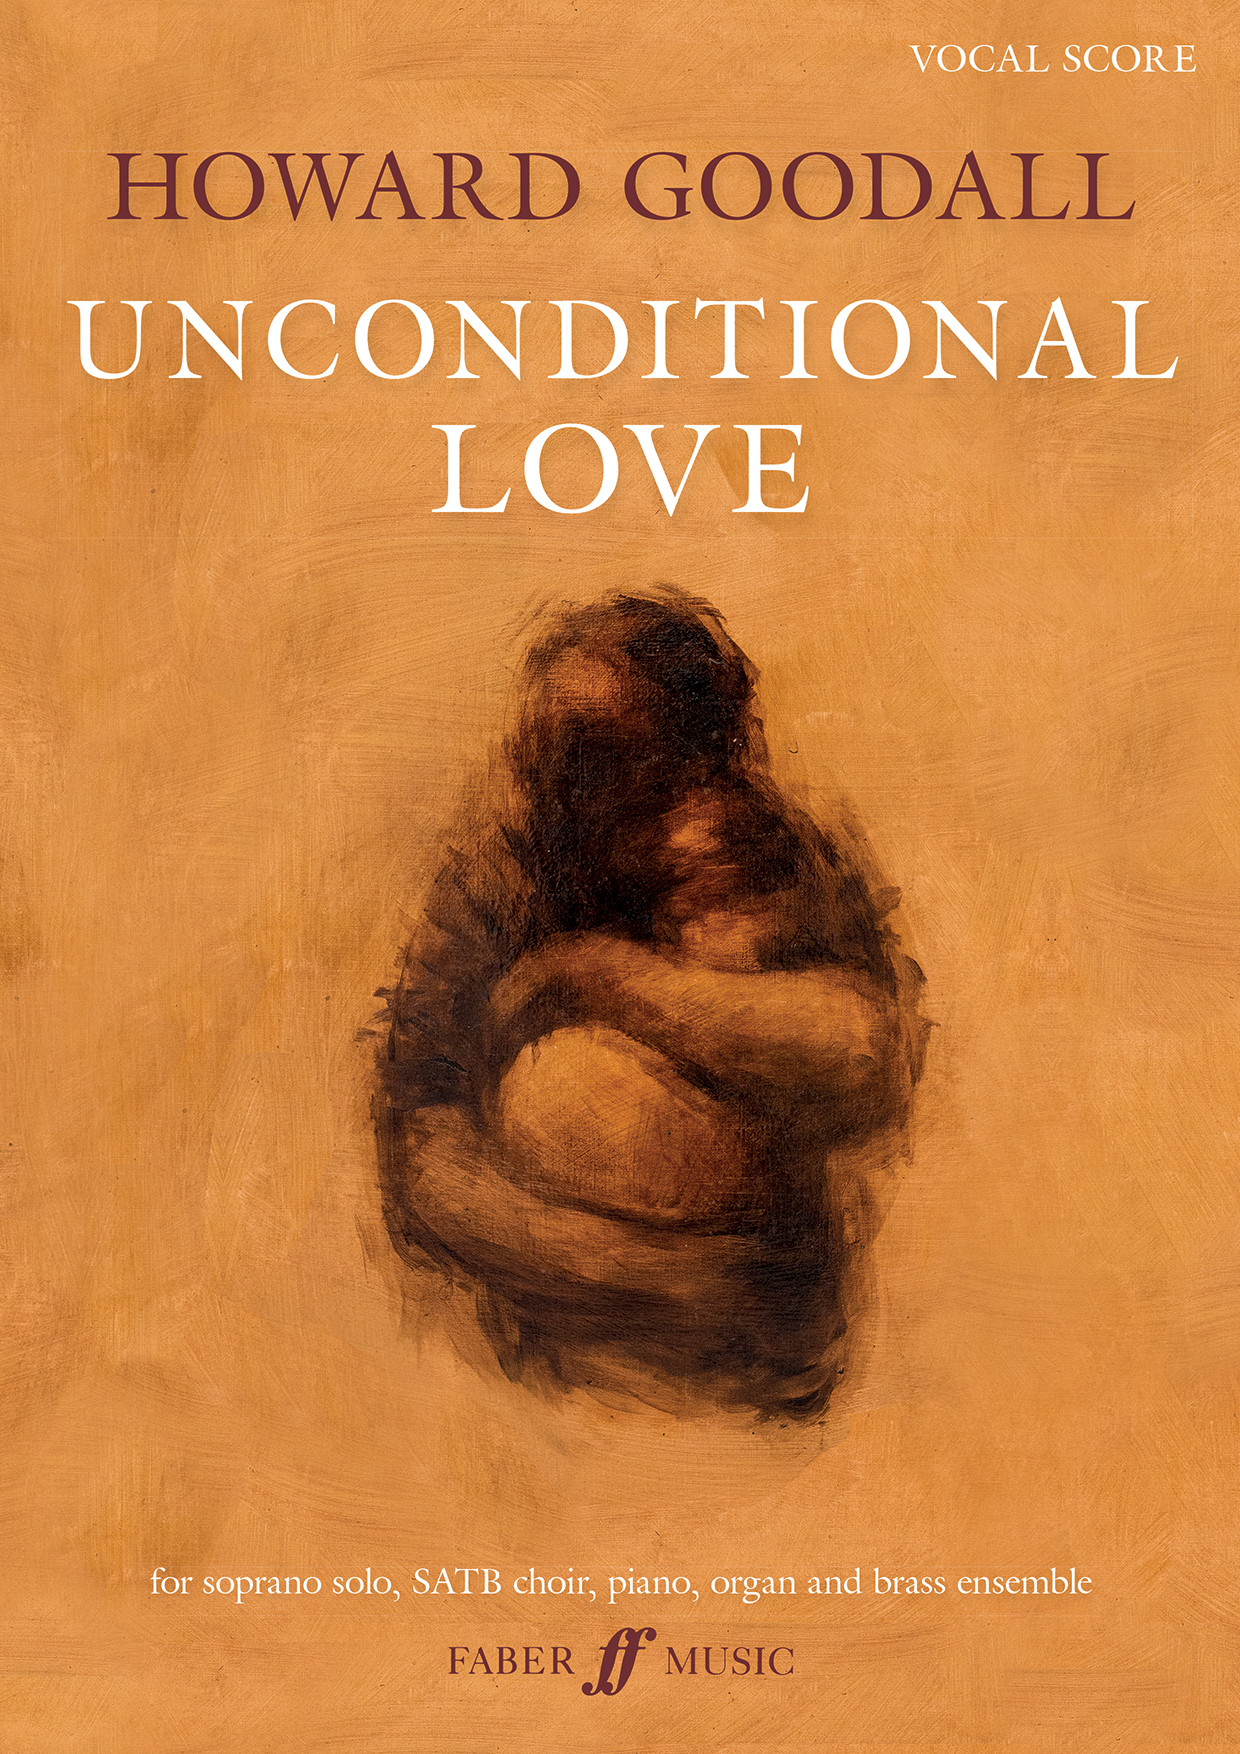 Goodall Unconditional Love Vocal Score Sheet Music Songbook